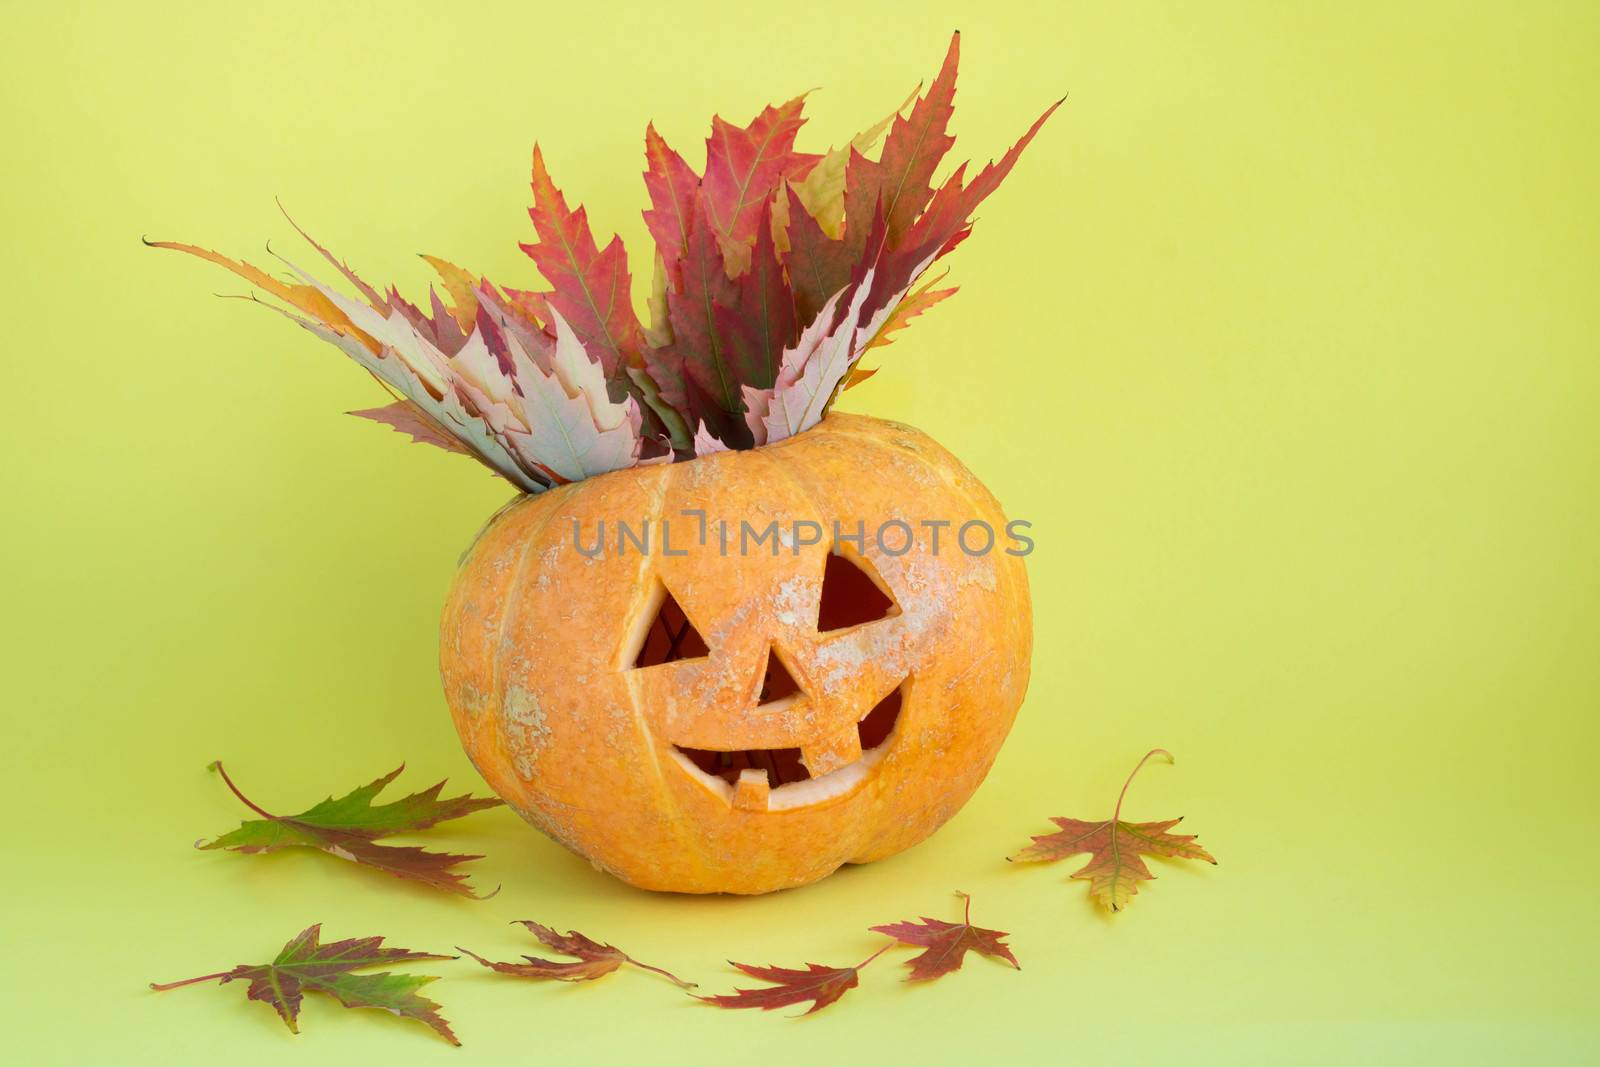 Funny pumpkin with maple leaves on a yellow background.The Concept Of Halloween.